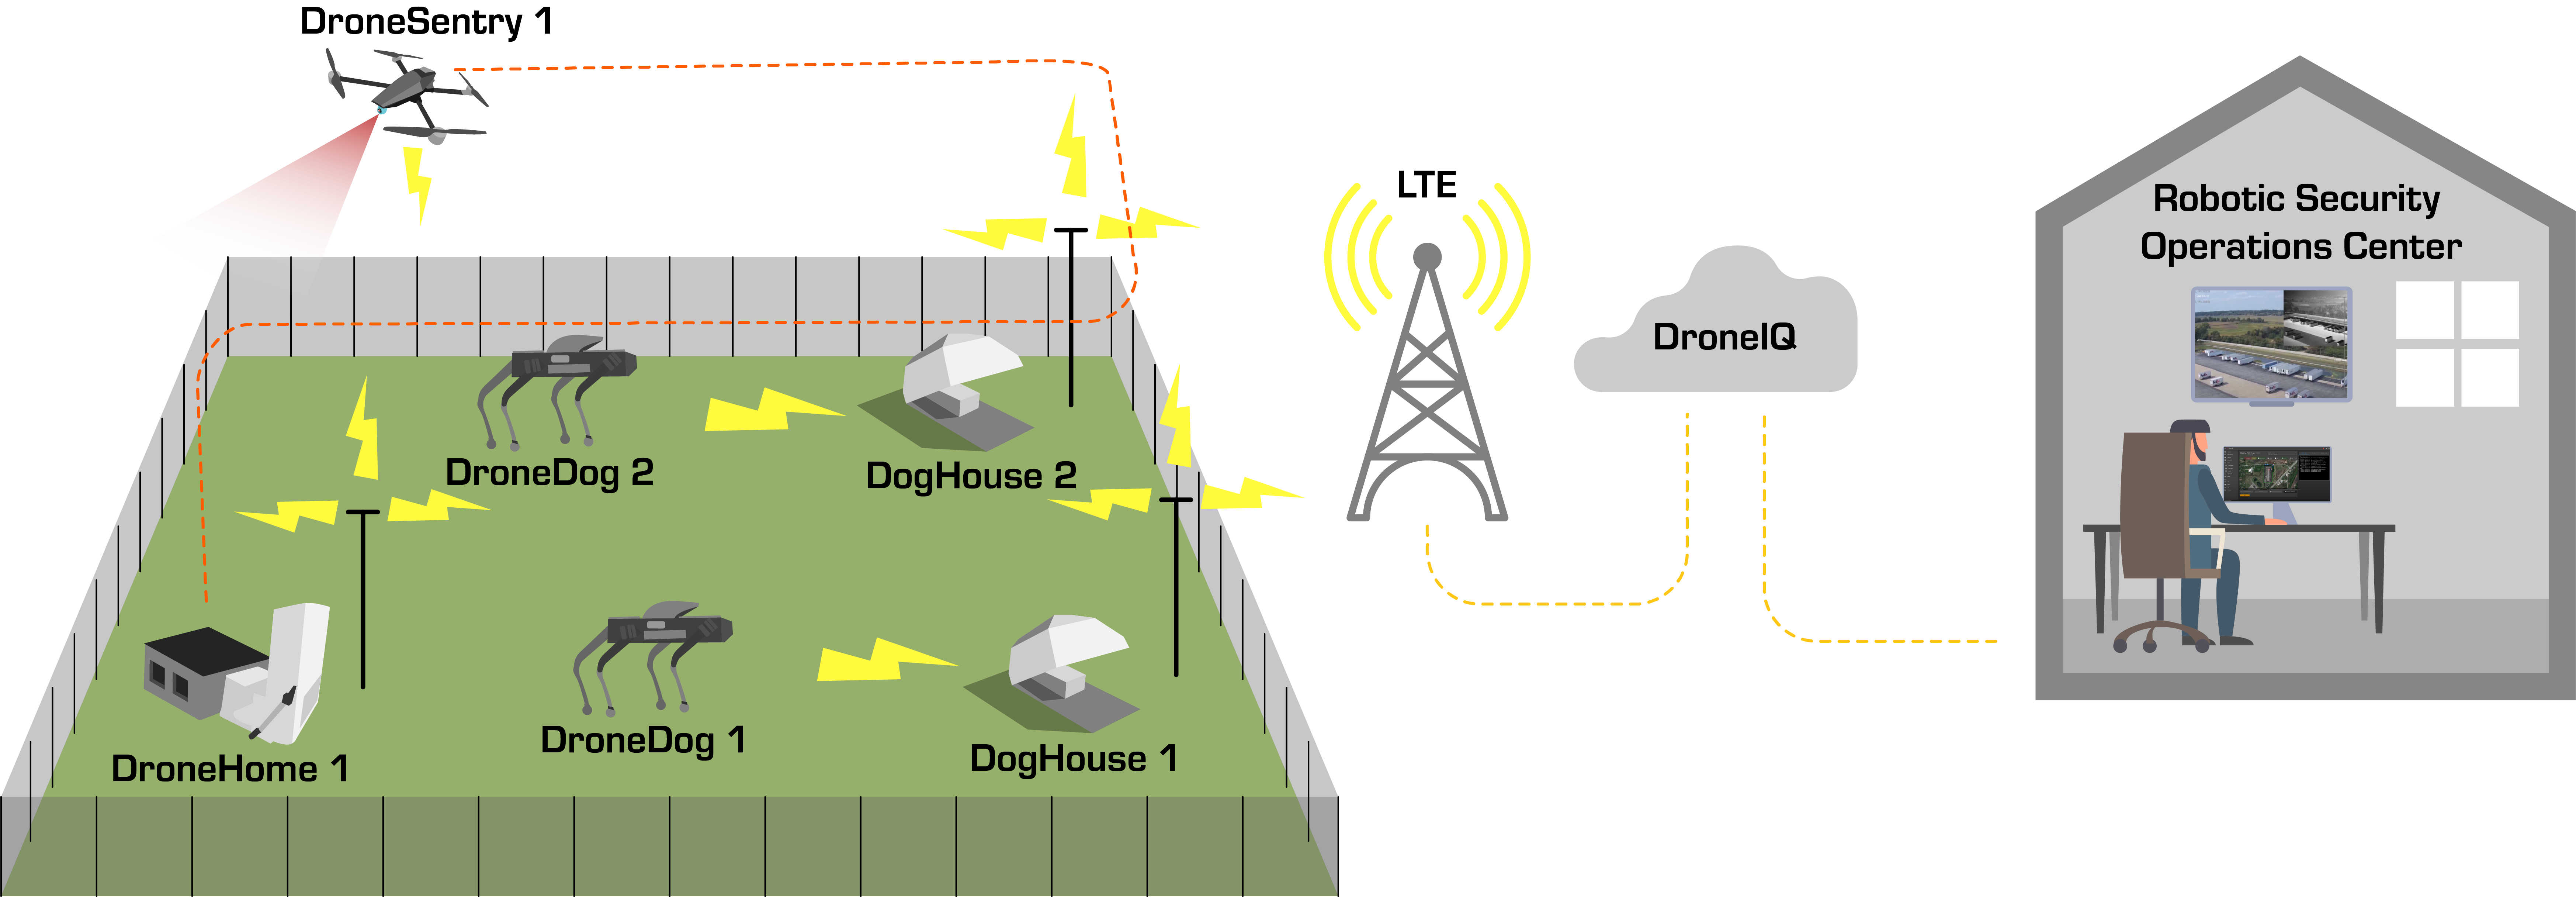 DroneCore concept of operations with dronesentry and dronedog being shown how they connect to LTE and the Asylon RSOC.